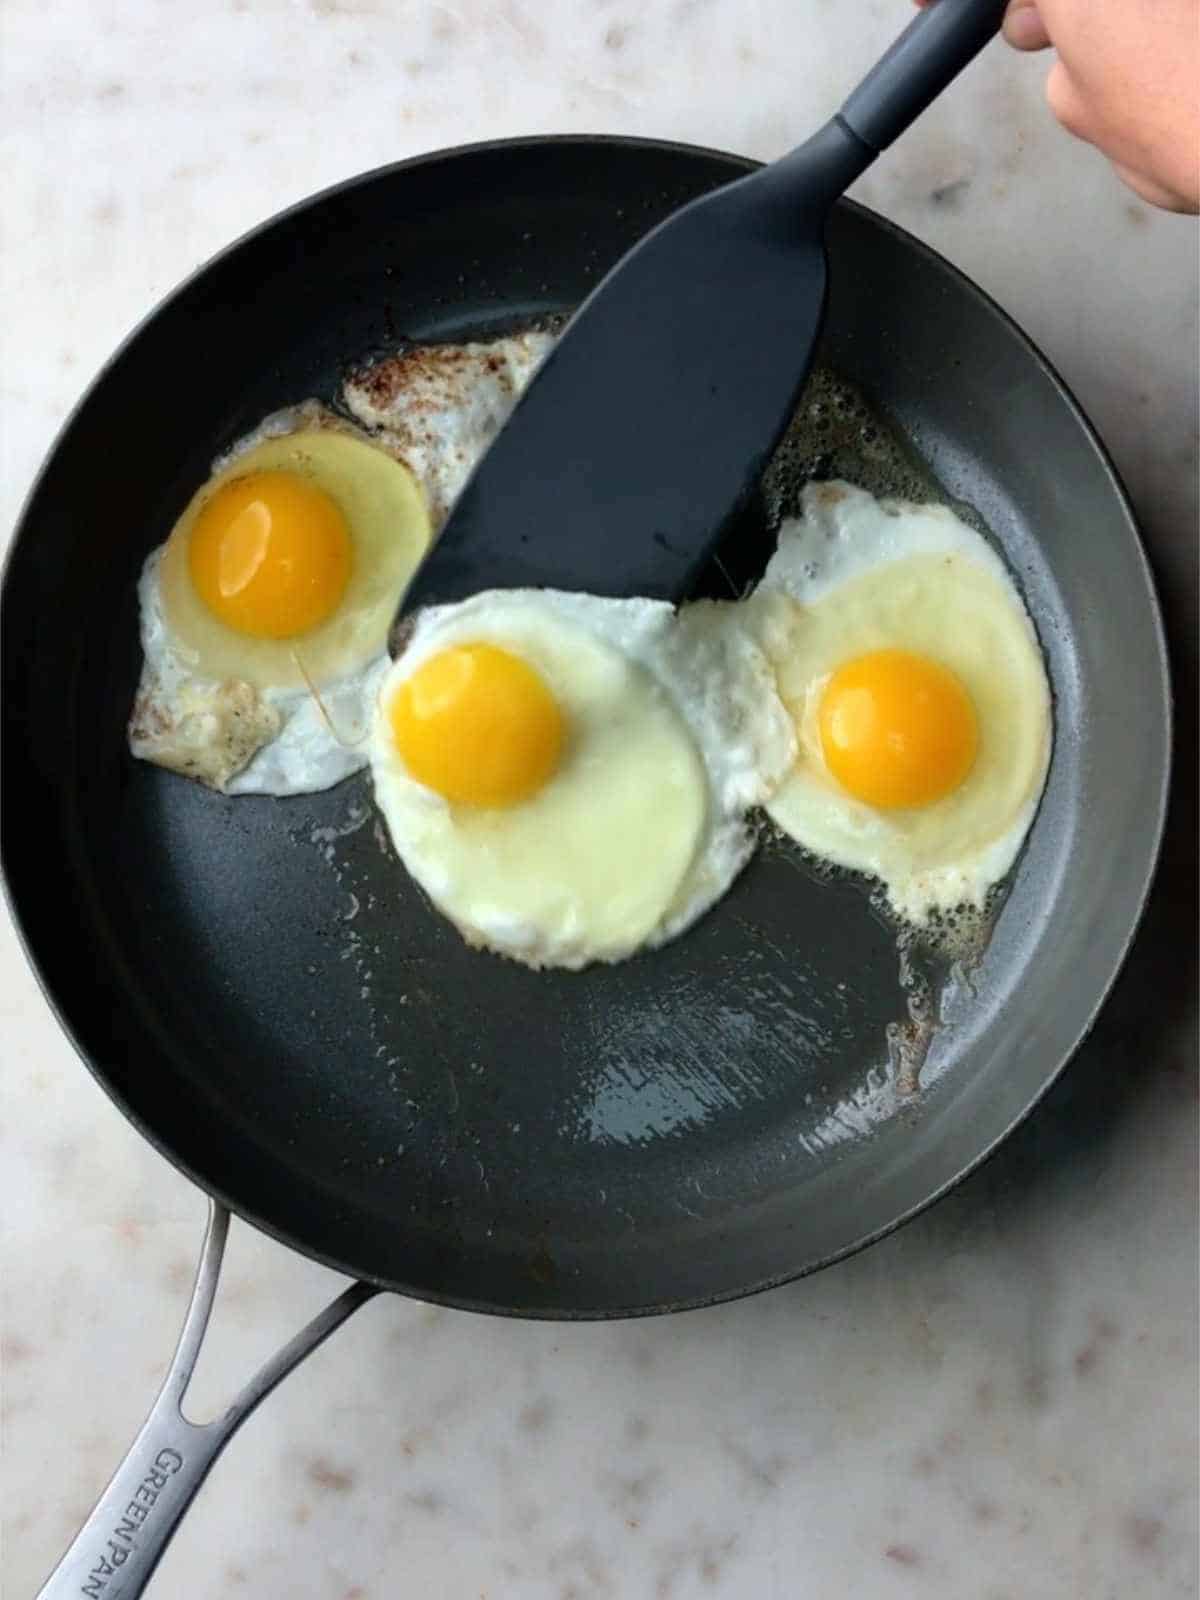 Fried eggs in a pan.